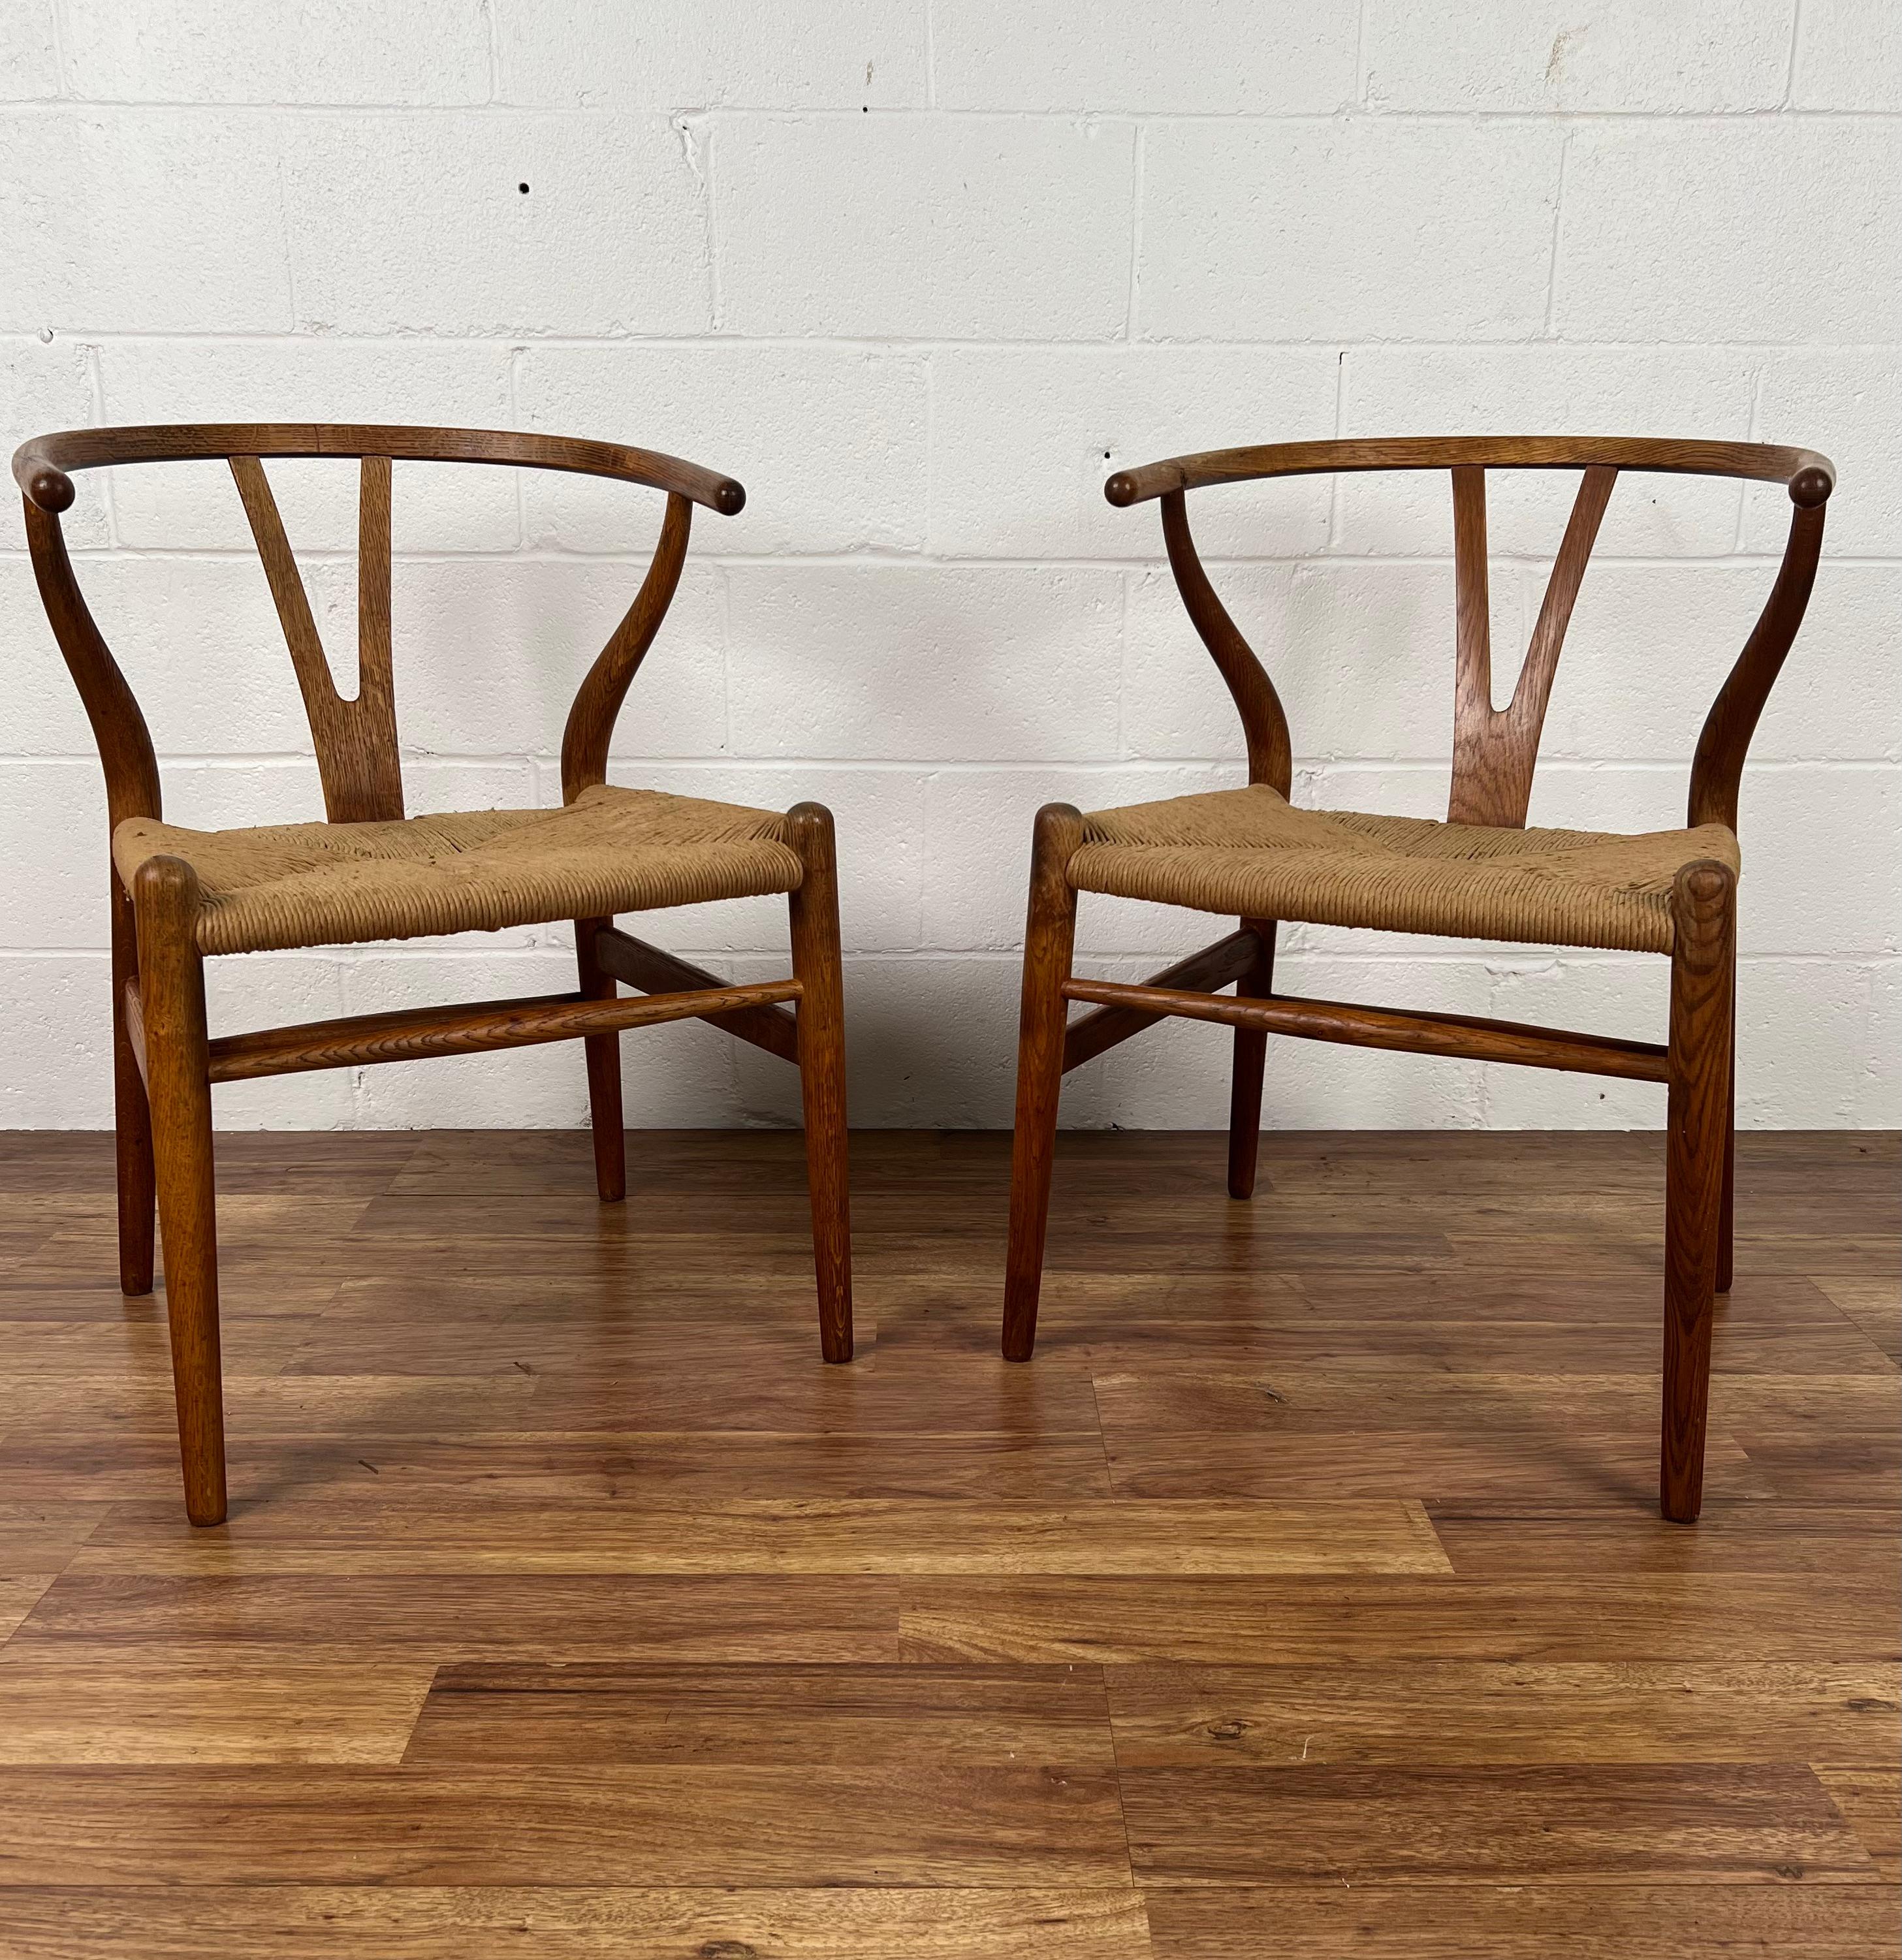 For your consideration we offer this rare and early original matched pair of Hans J. Wegner's iconic CH24 wishbone chairs. These have been the most popular of all of the beautiful pieces made by this legendary designer. This lovely pair was